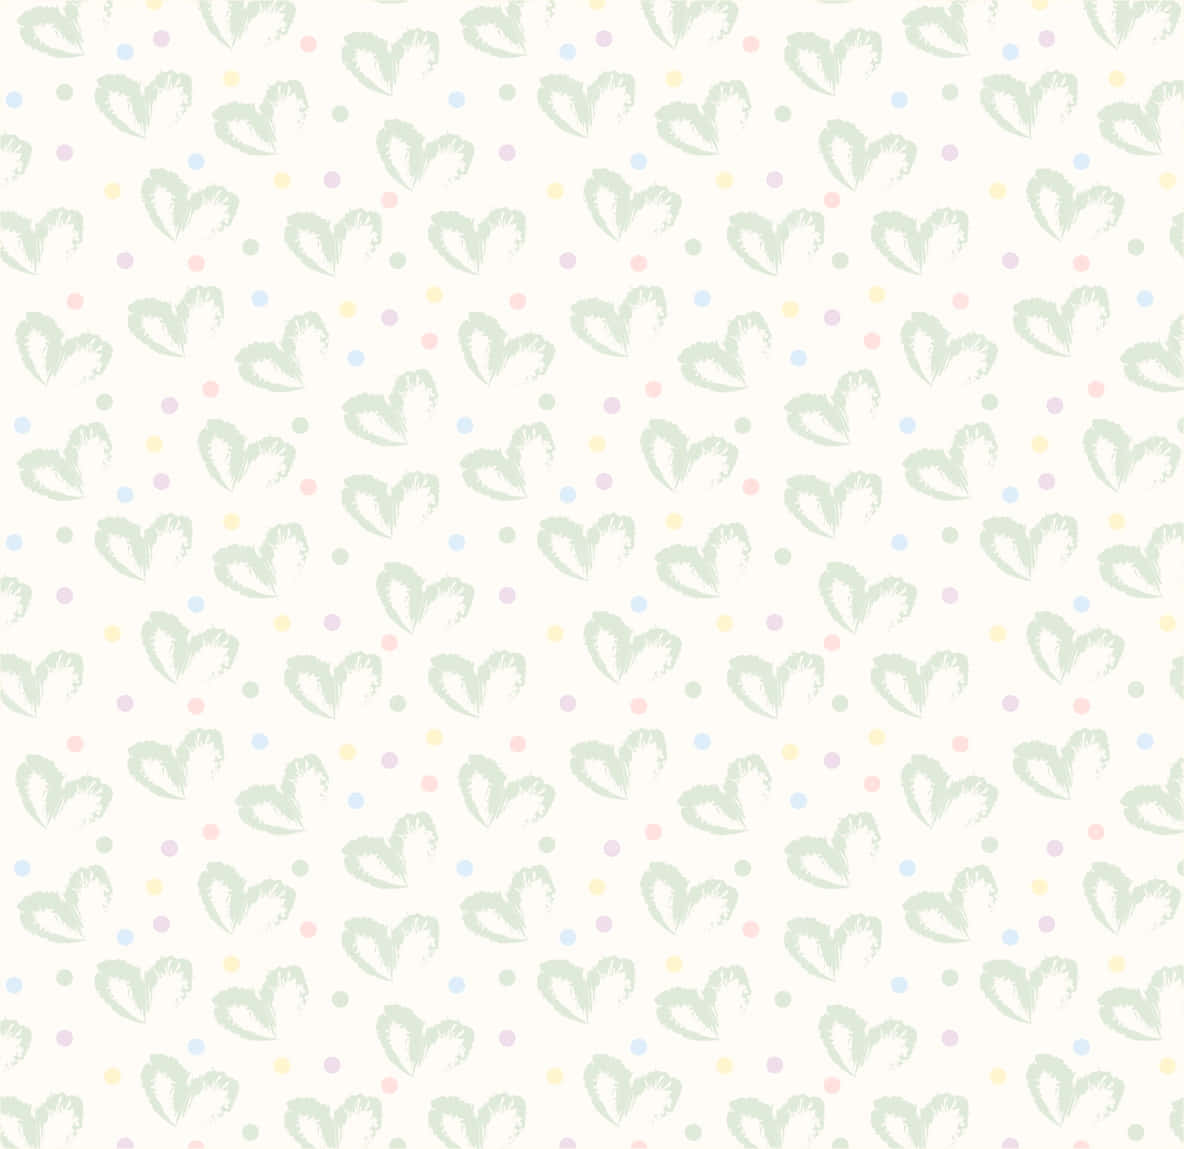 A Pattern Of Hearts In Green And White Wallpaper